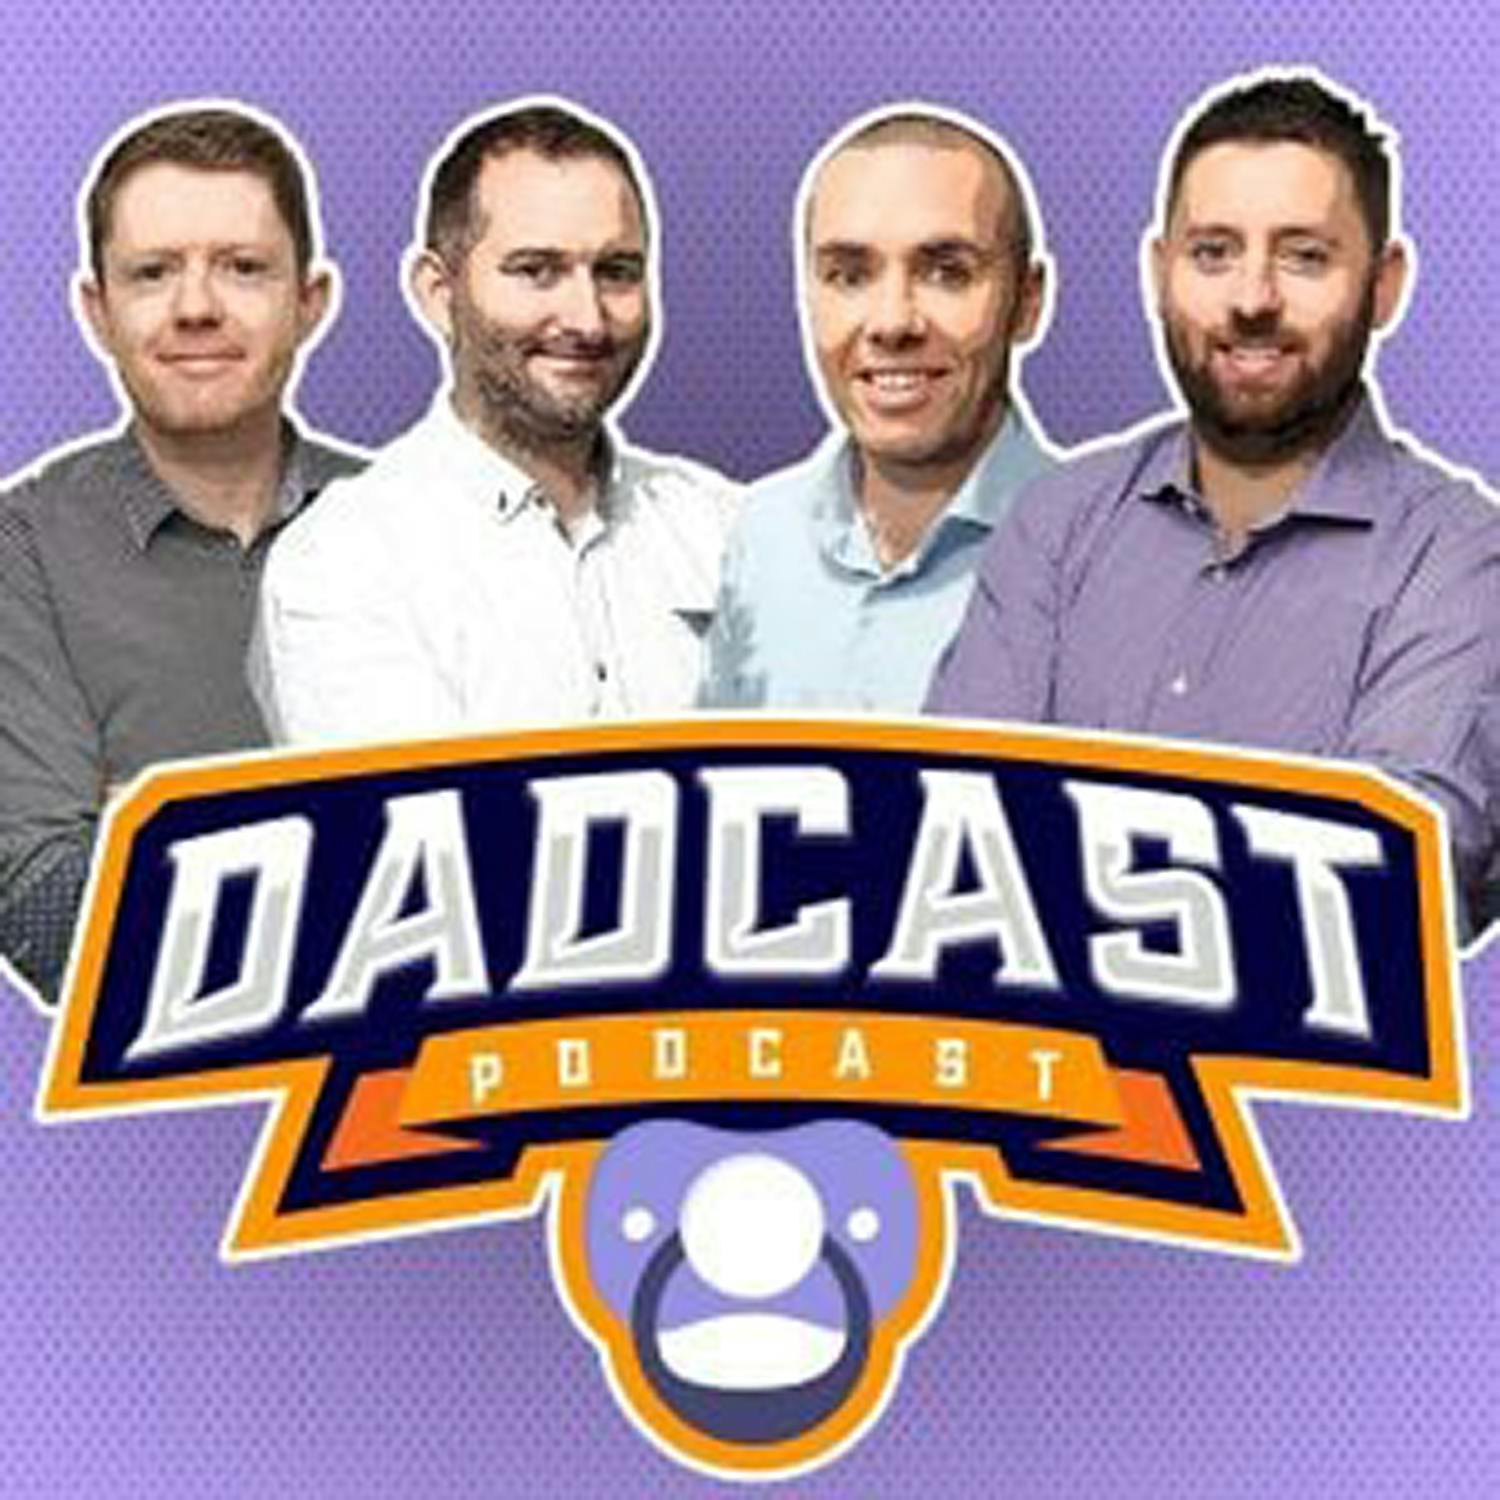 The Dadcast S3 Ep.9 | The dads tackle the biggest issues like - to clean up the playroom or just leave it?